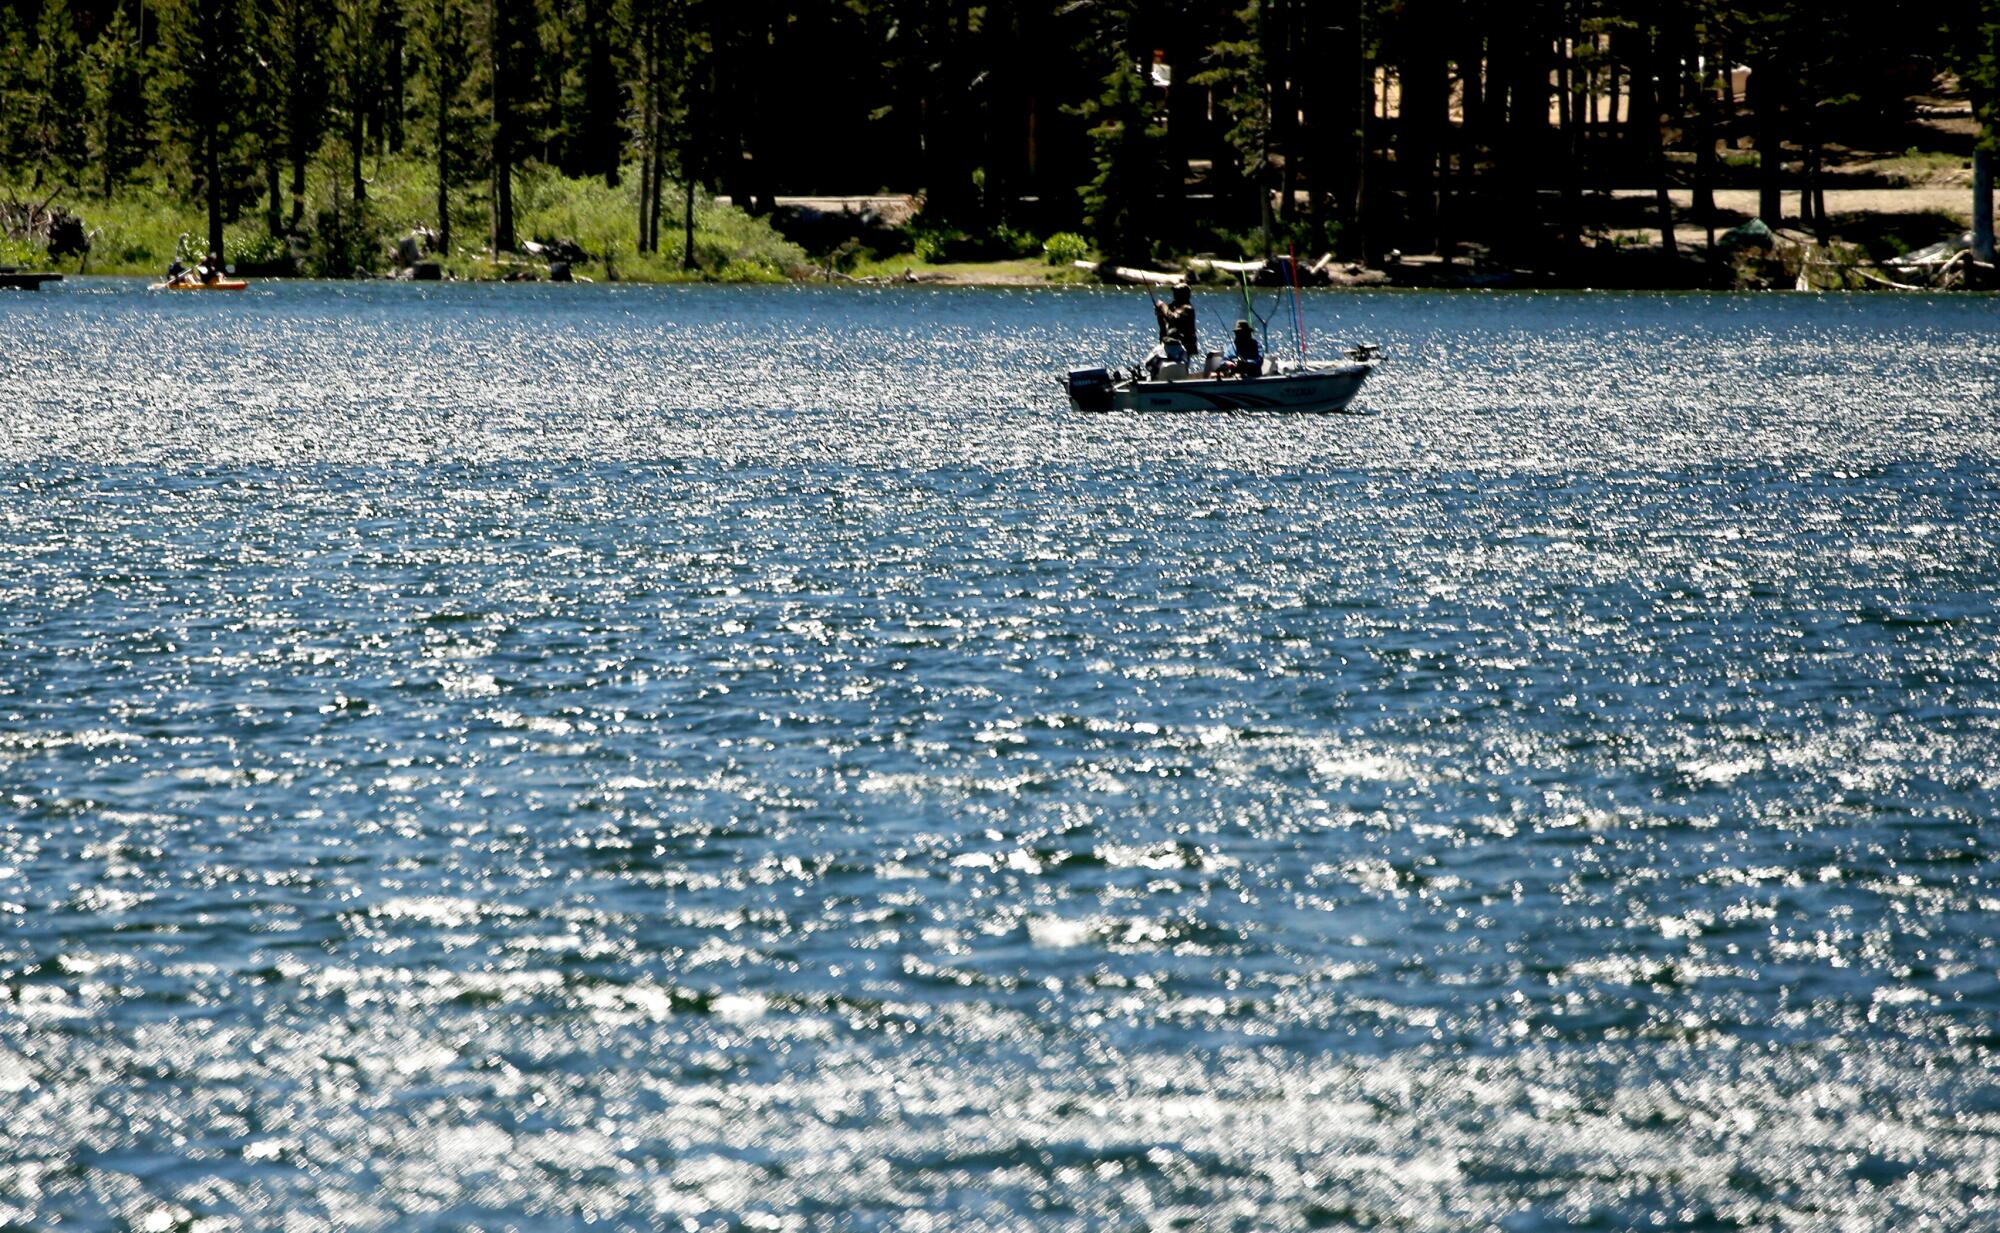 Anglers in a small motorboat cast lines into a bright blue lake.